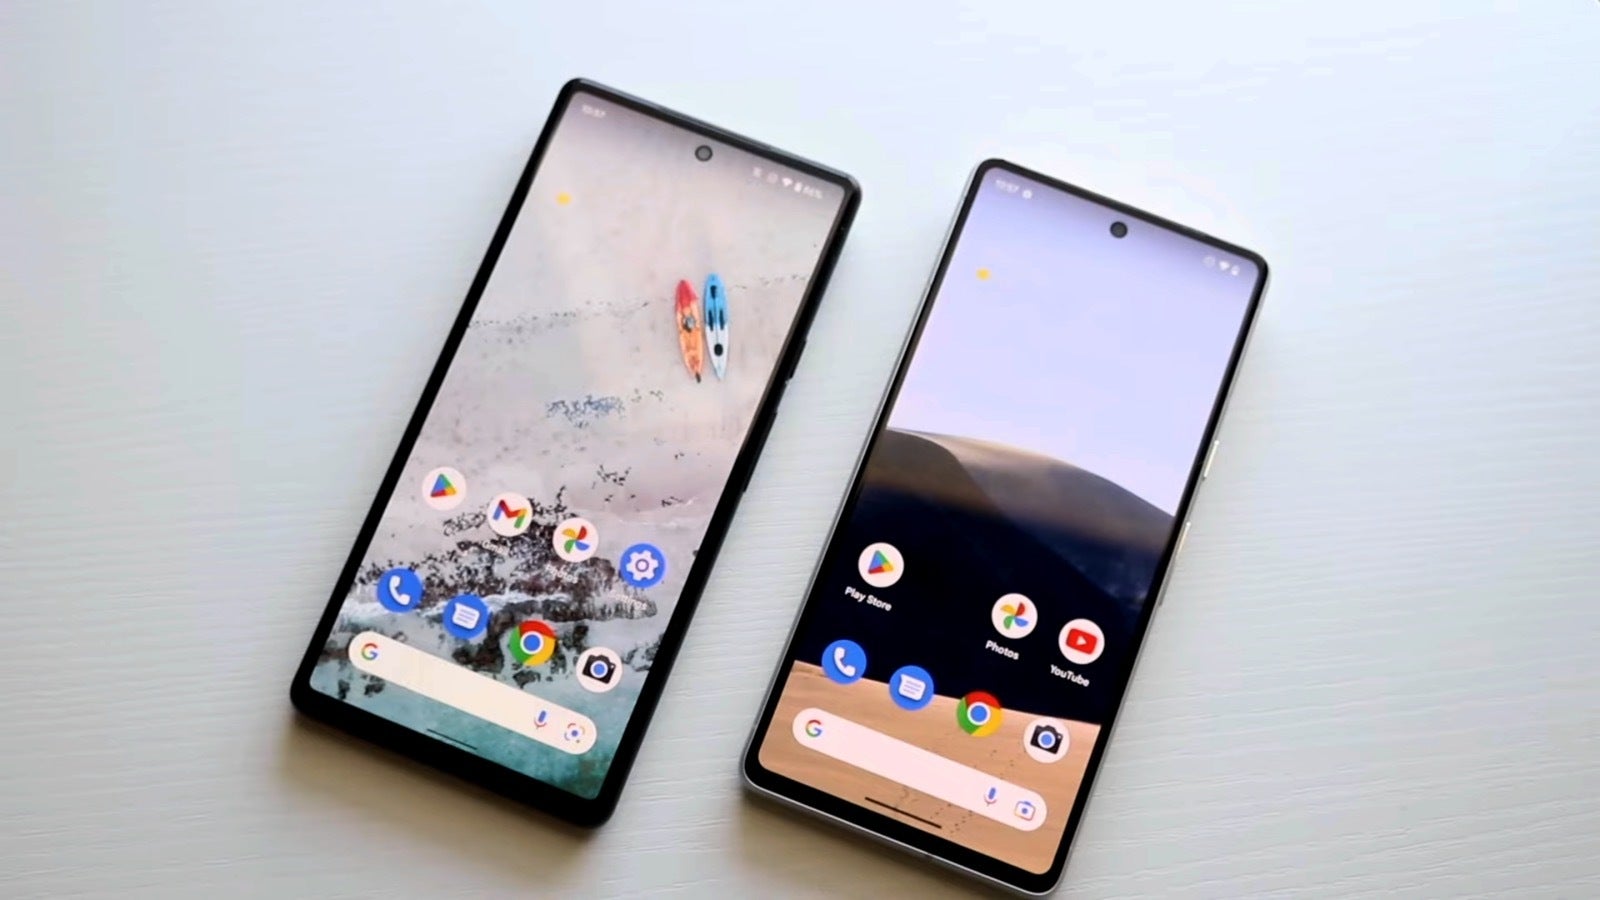 Pixel 7 is what the Pixel 6 probably should've been. - It took Google 5 years! Pixel 7 is the easiest to recommend Android flagship phone right now!